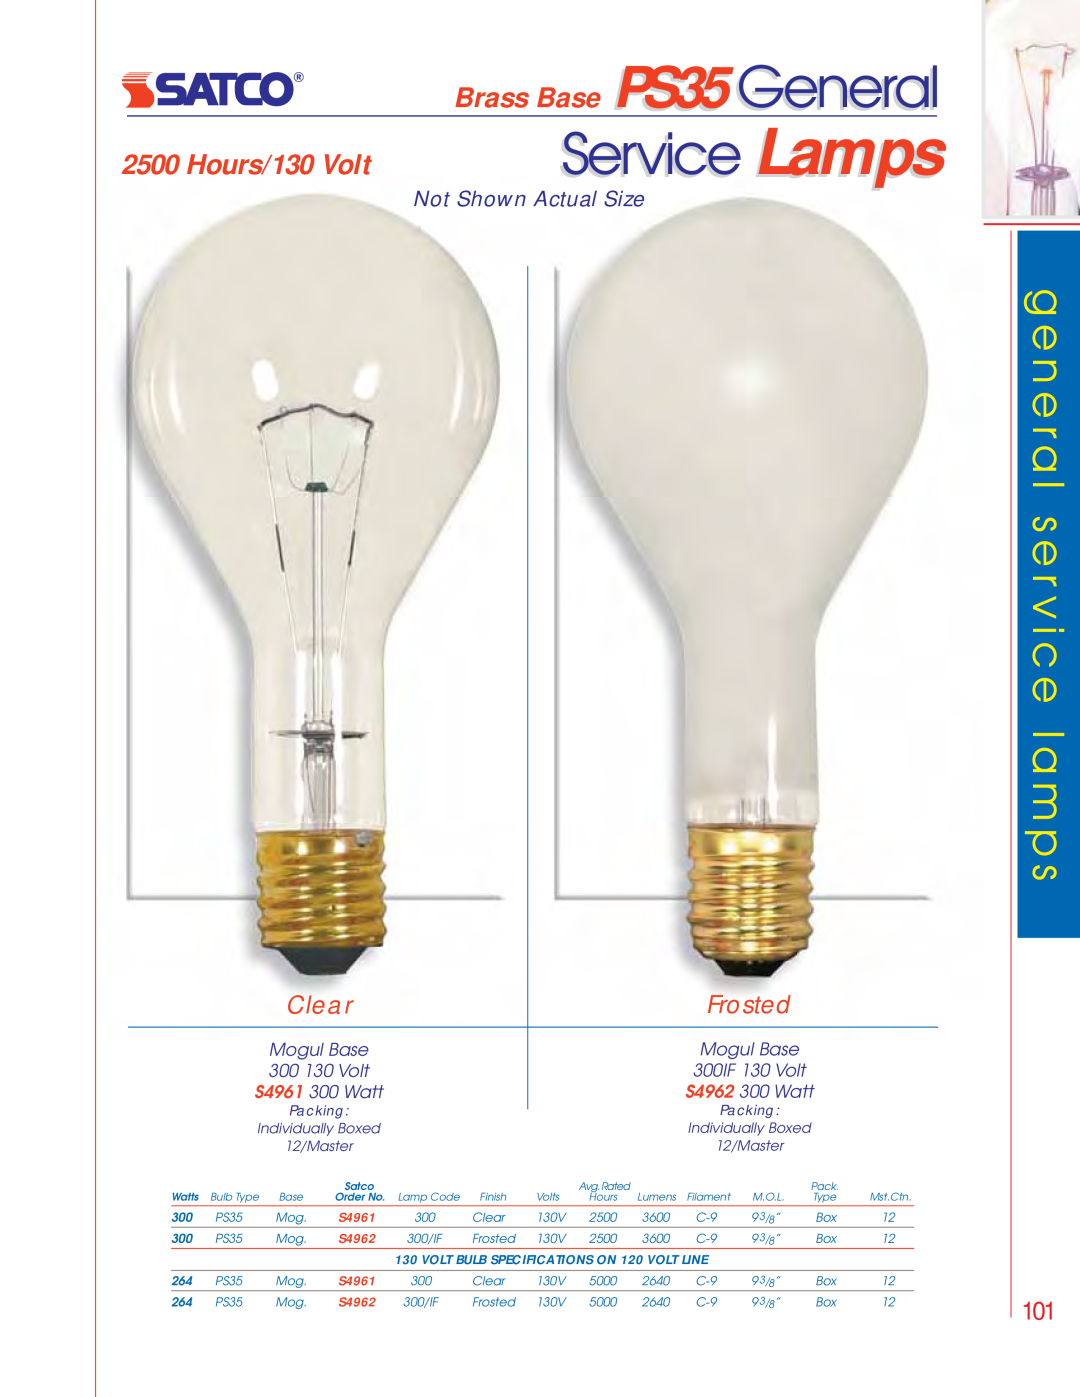 Satco Products S3681 Service Lamps, Brass Base PS35General, g e n e r a l s e r v i c e l a m p s, Hours/130 Volt, Clear 